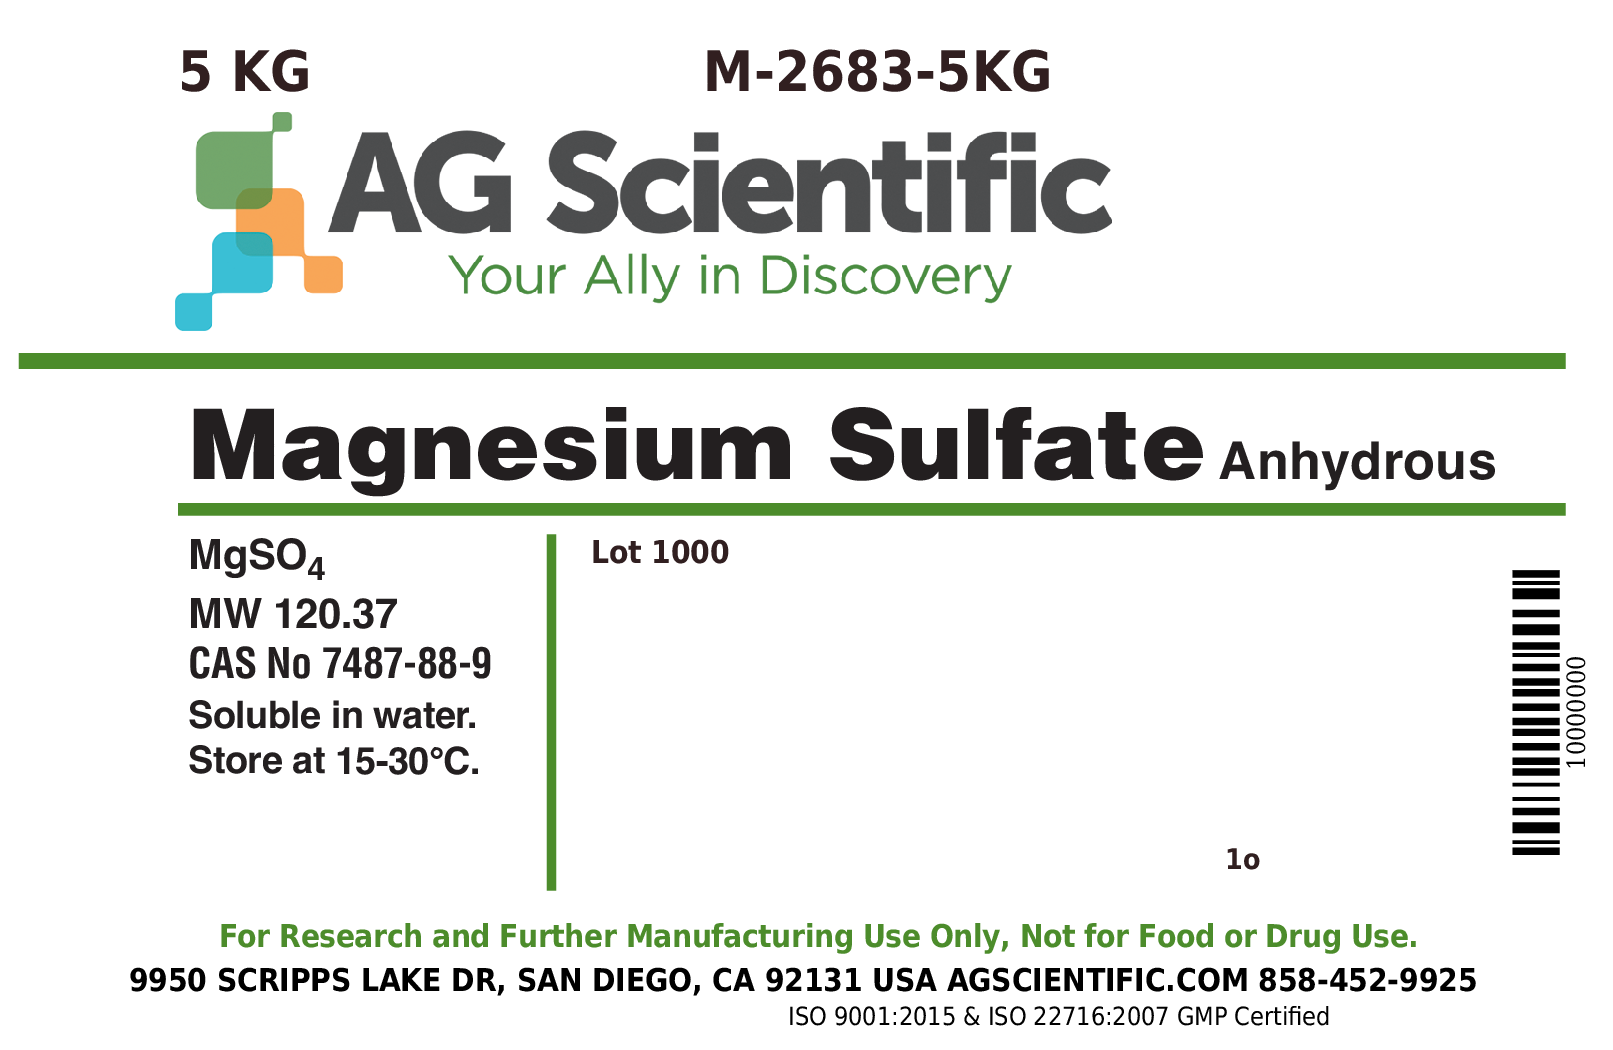 Magnesium Sulfate Anhydrous, 5 KG